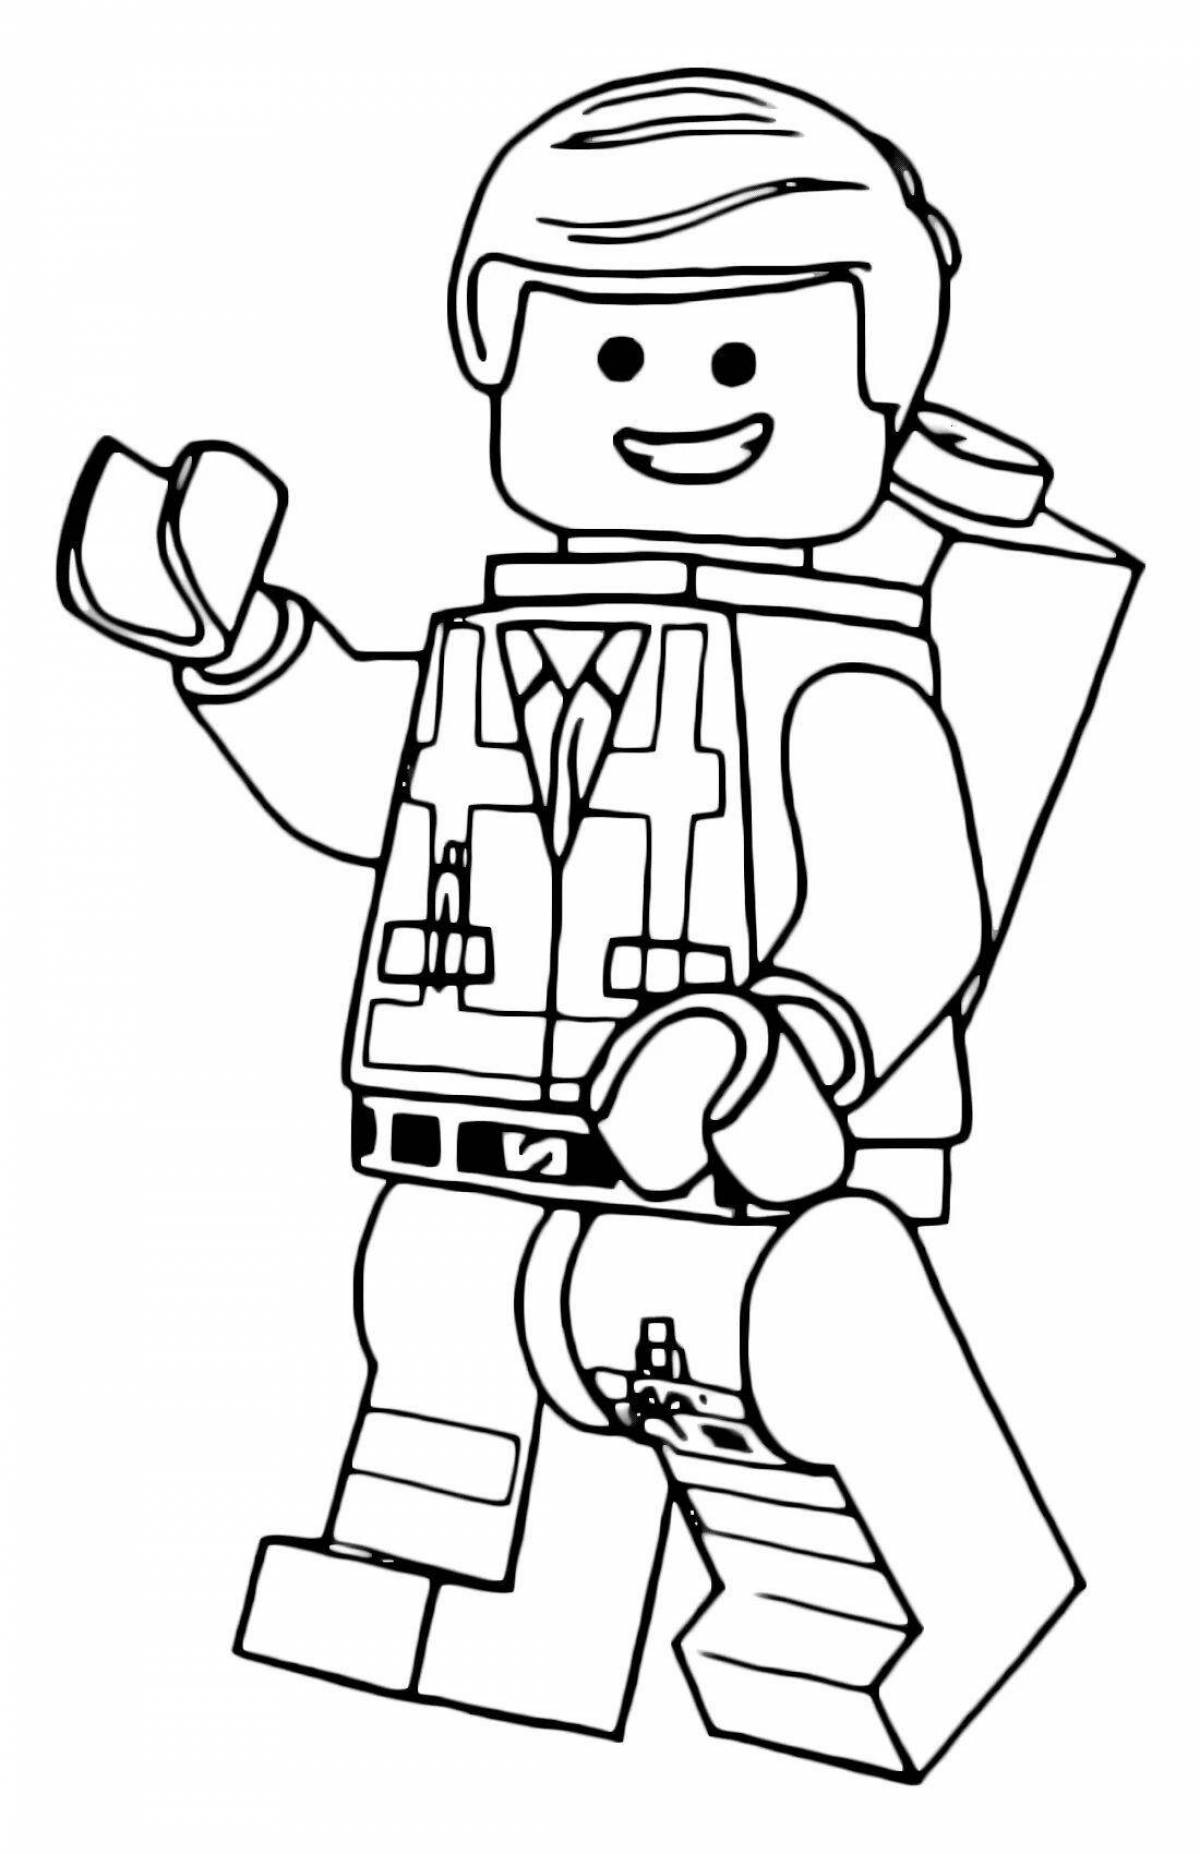 Playful lego figures coloring page